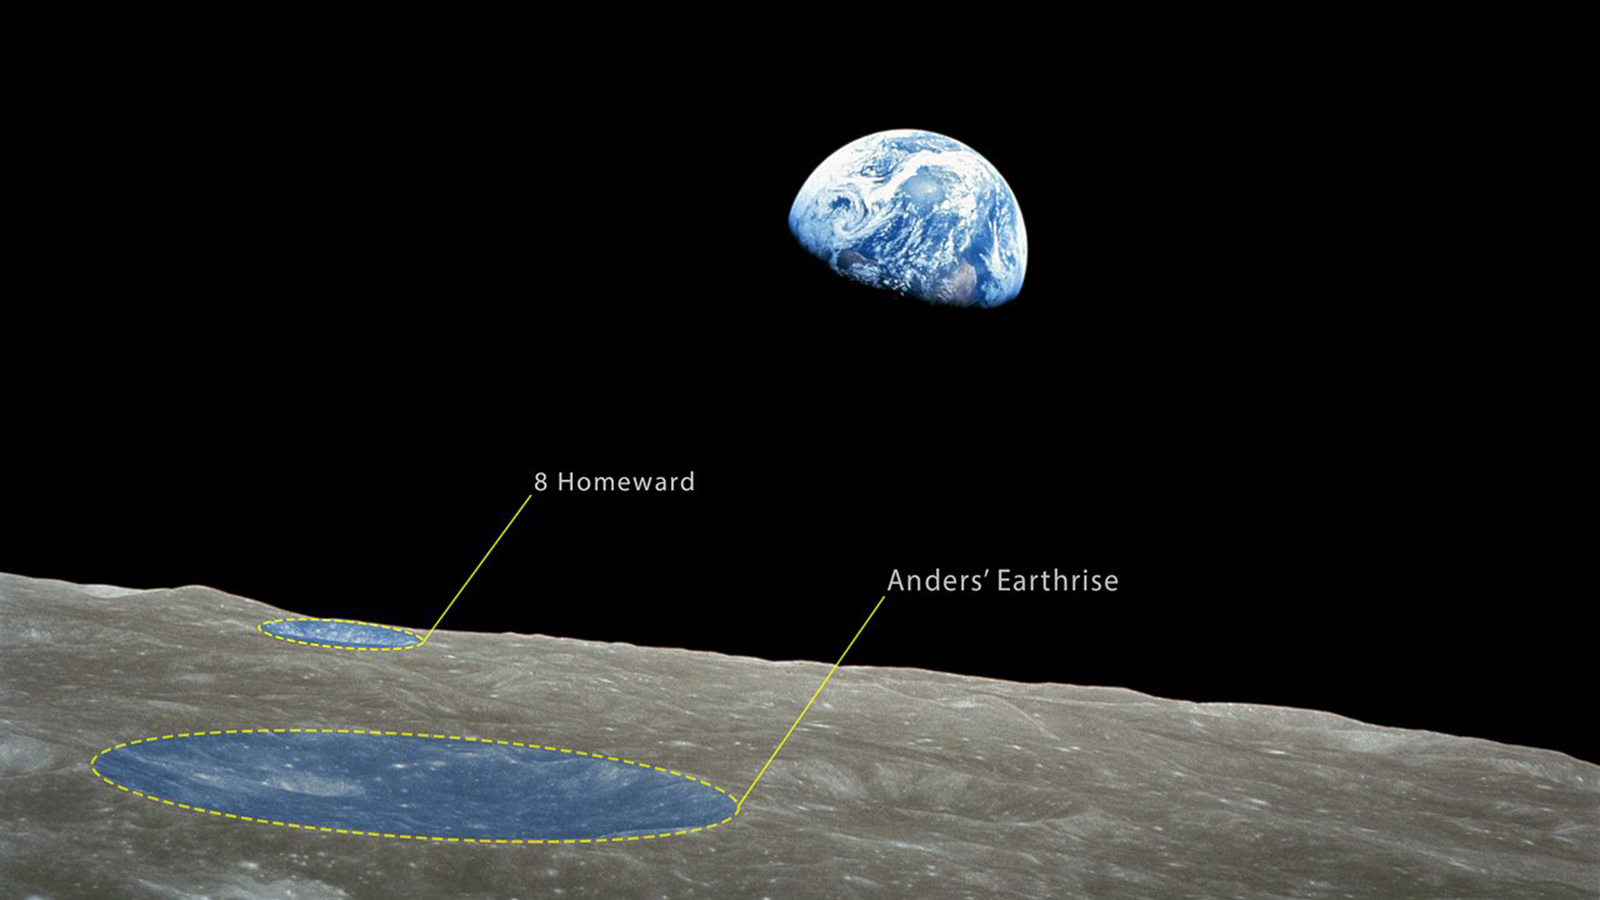 Two craters highlighted on the limb of the Moon with Earth rising above.